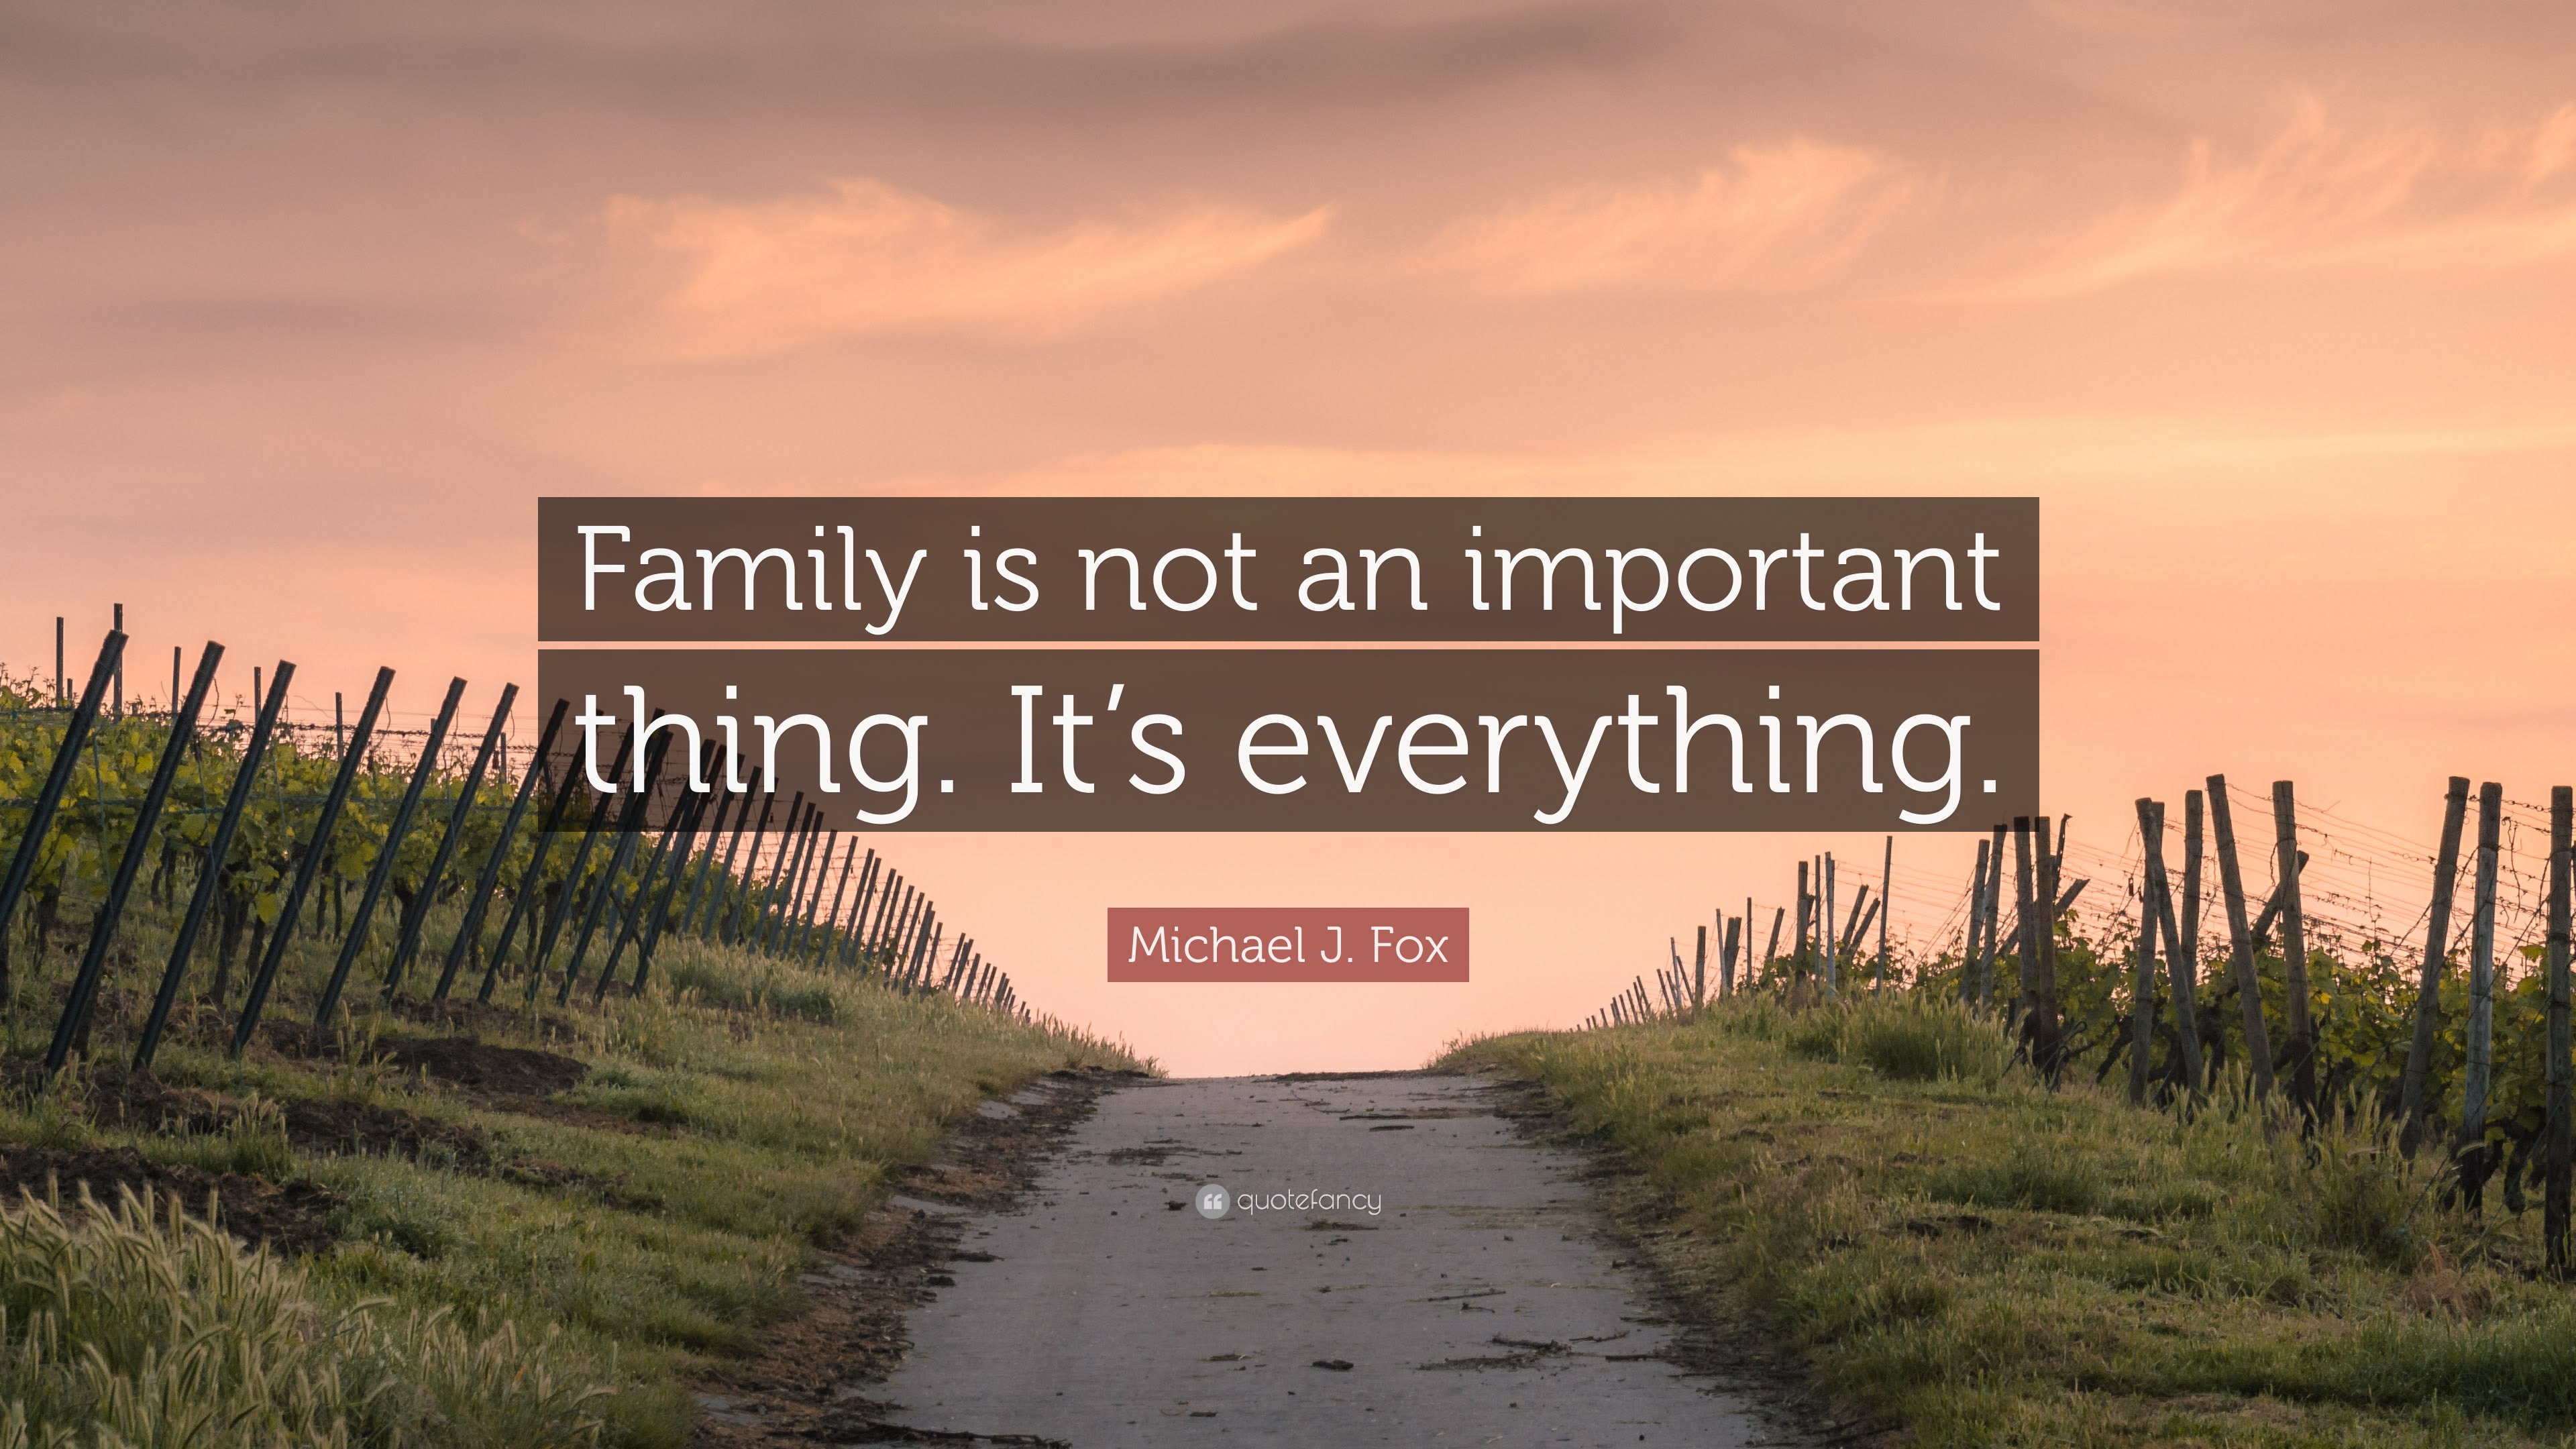 Michael J. Fox Quote: “Family is not an important thing. It’s everything.”